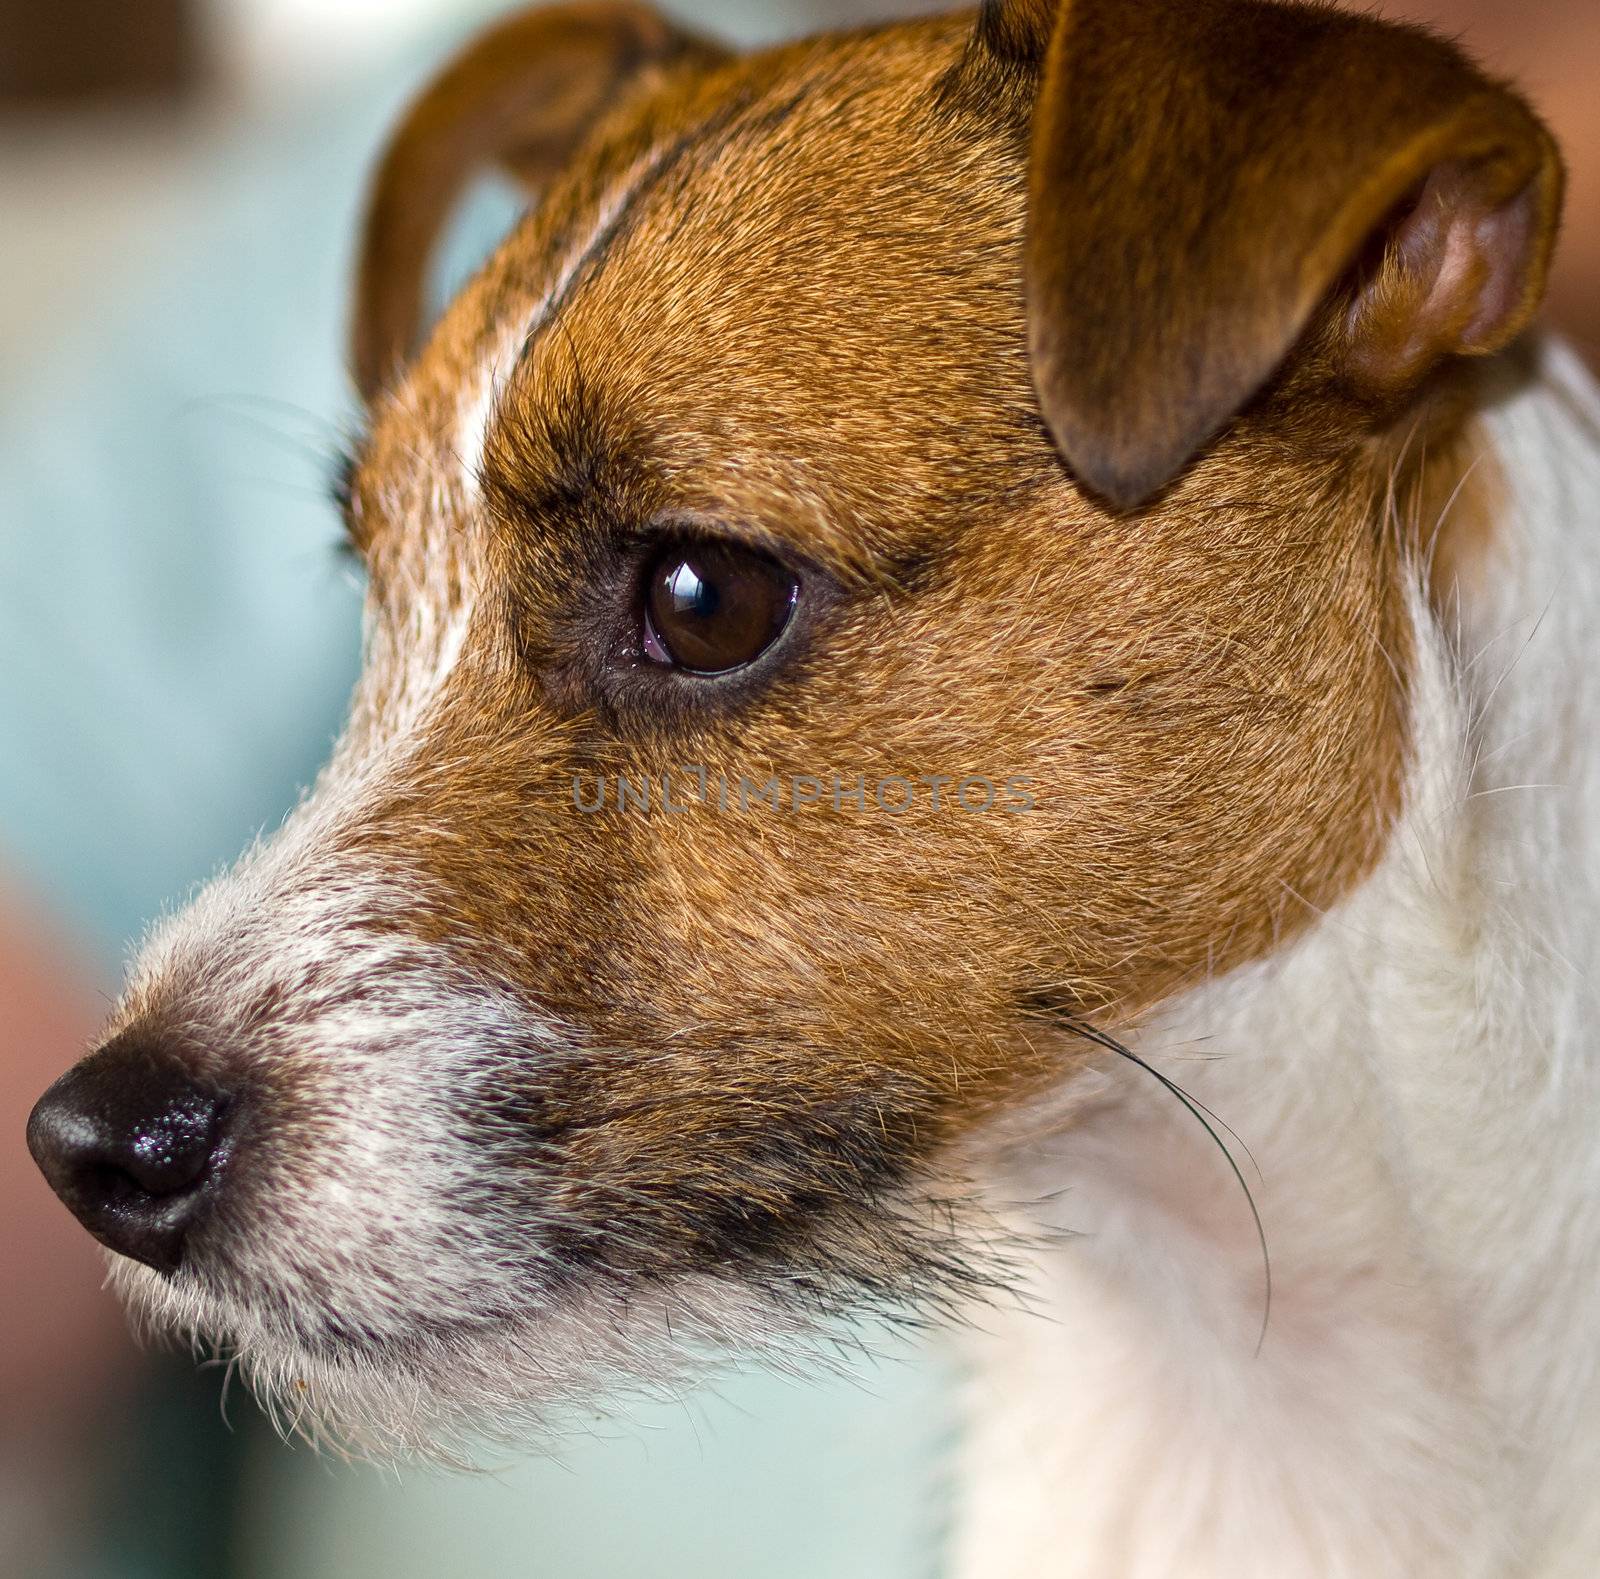 Portrait of a Cute Jack Russell Terrier